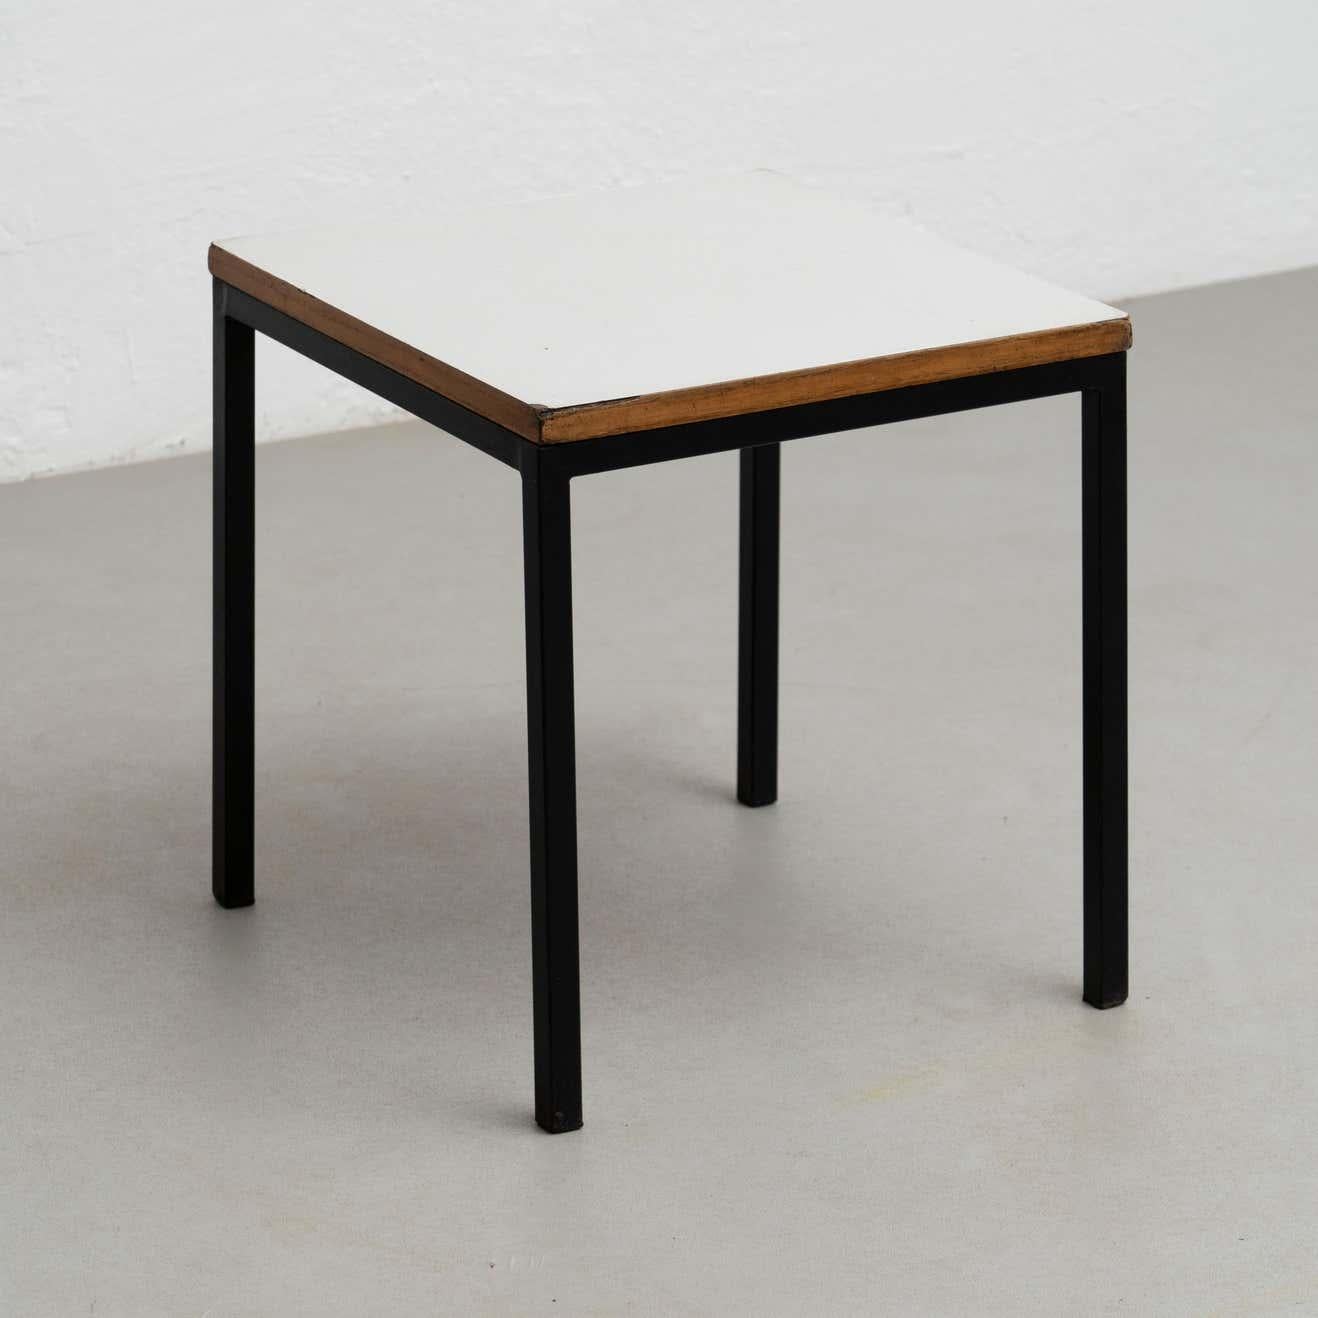 Charlotte Perriand Metal, Wood and Formica Table for Cansado, circa 1950 In Good Condition For Sale In Barcelona, Barcelona